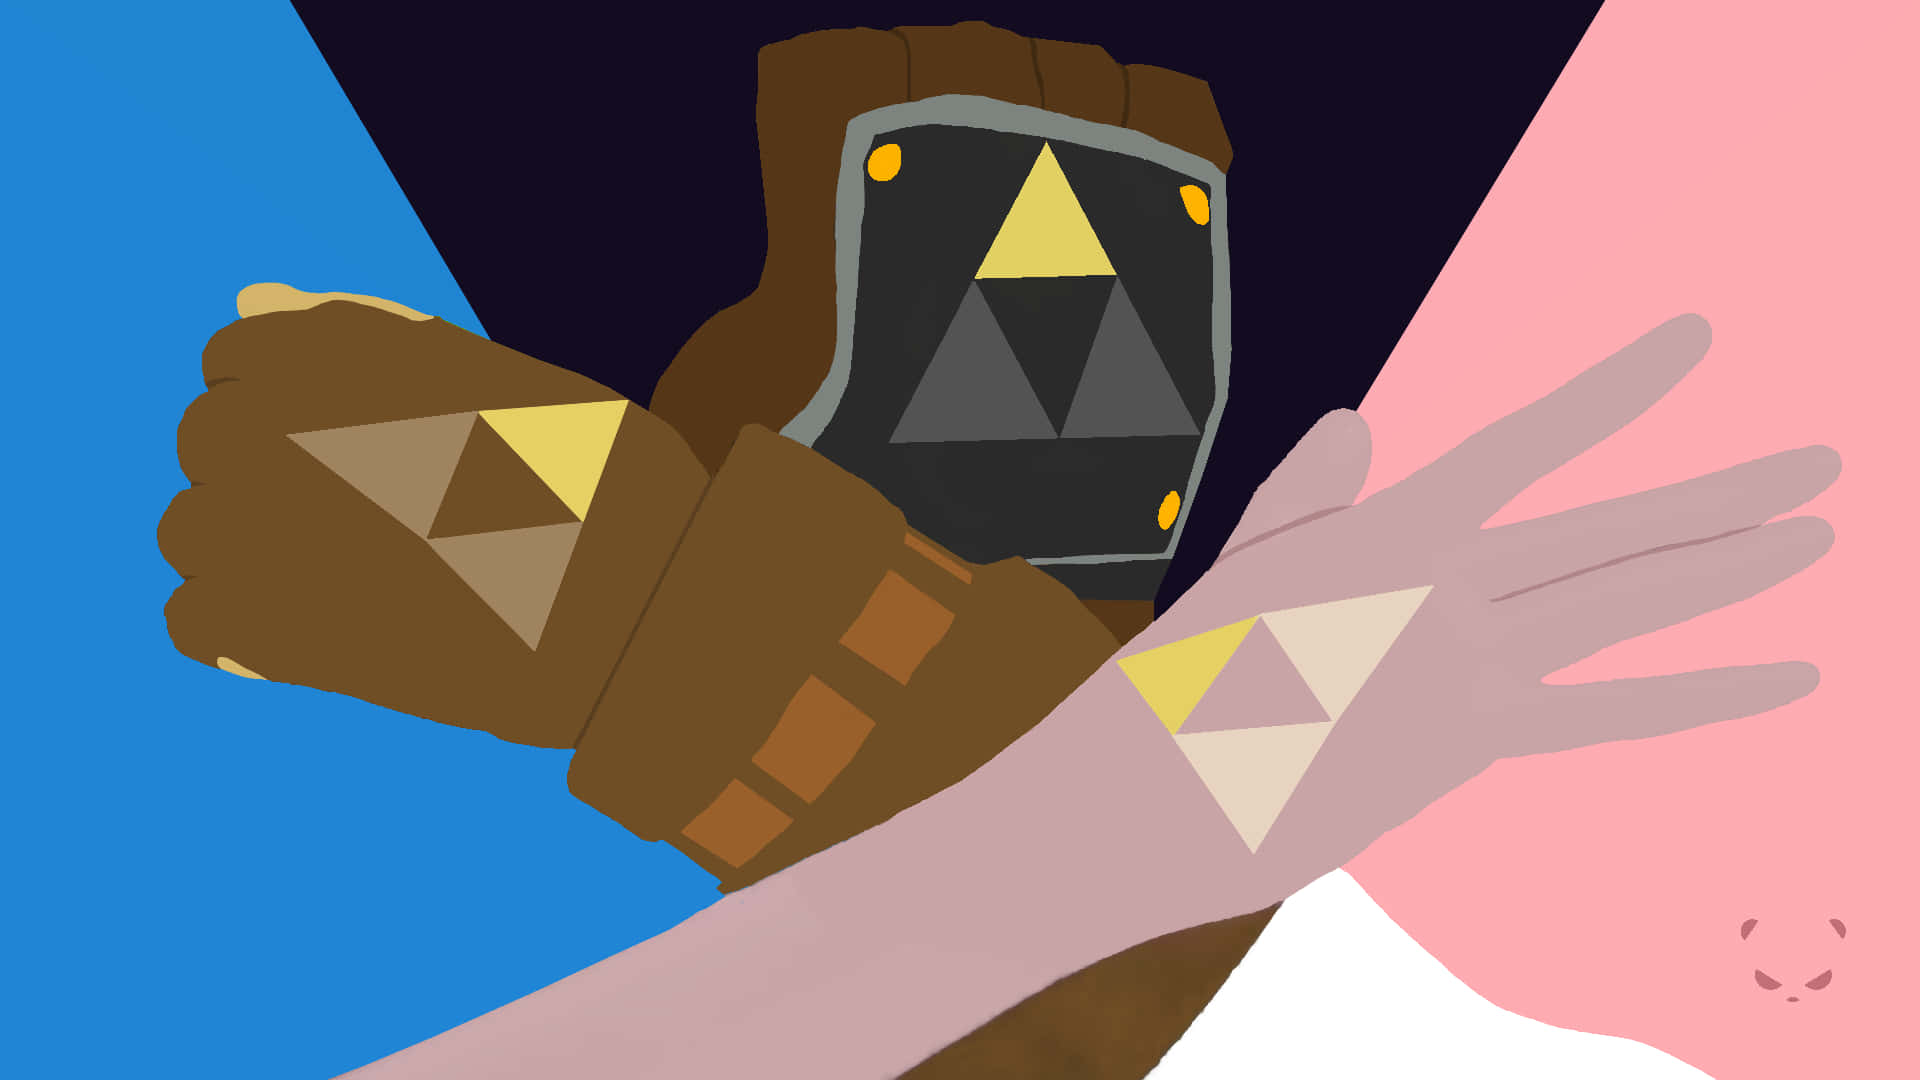 "Legend of the Triforce - Harness the Power of Courage, Power and Wisdom." Wallpaper